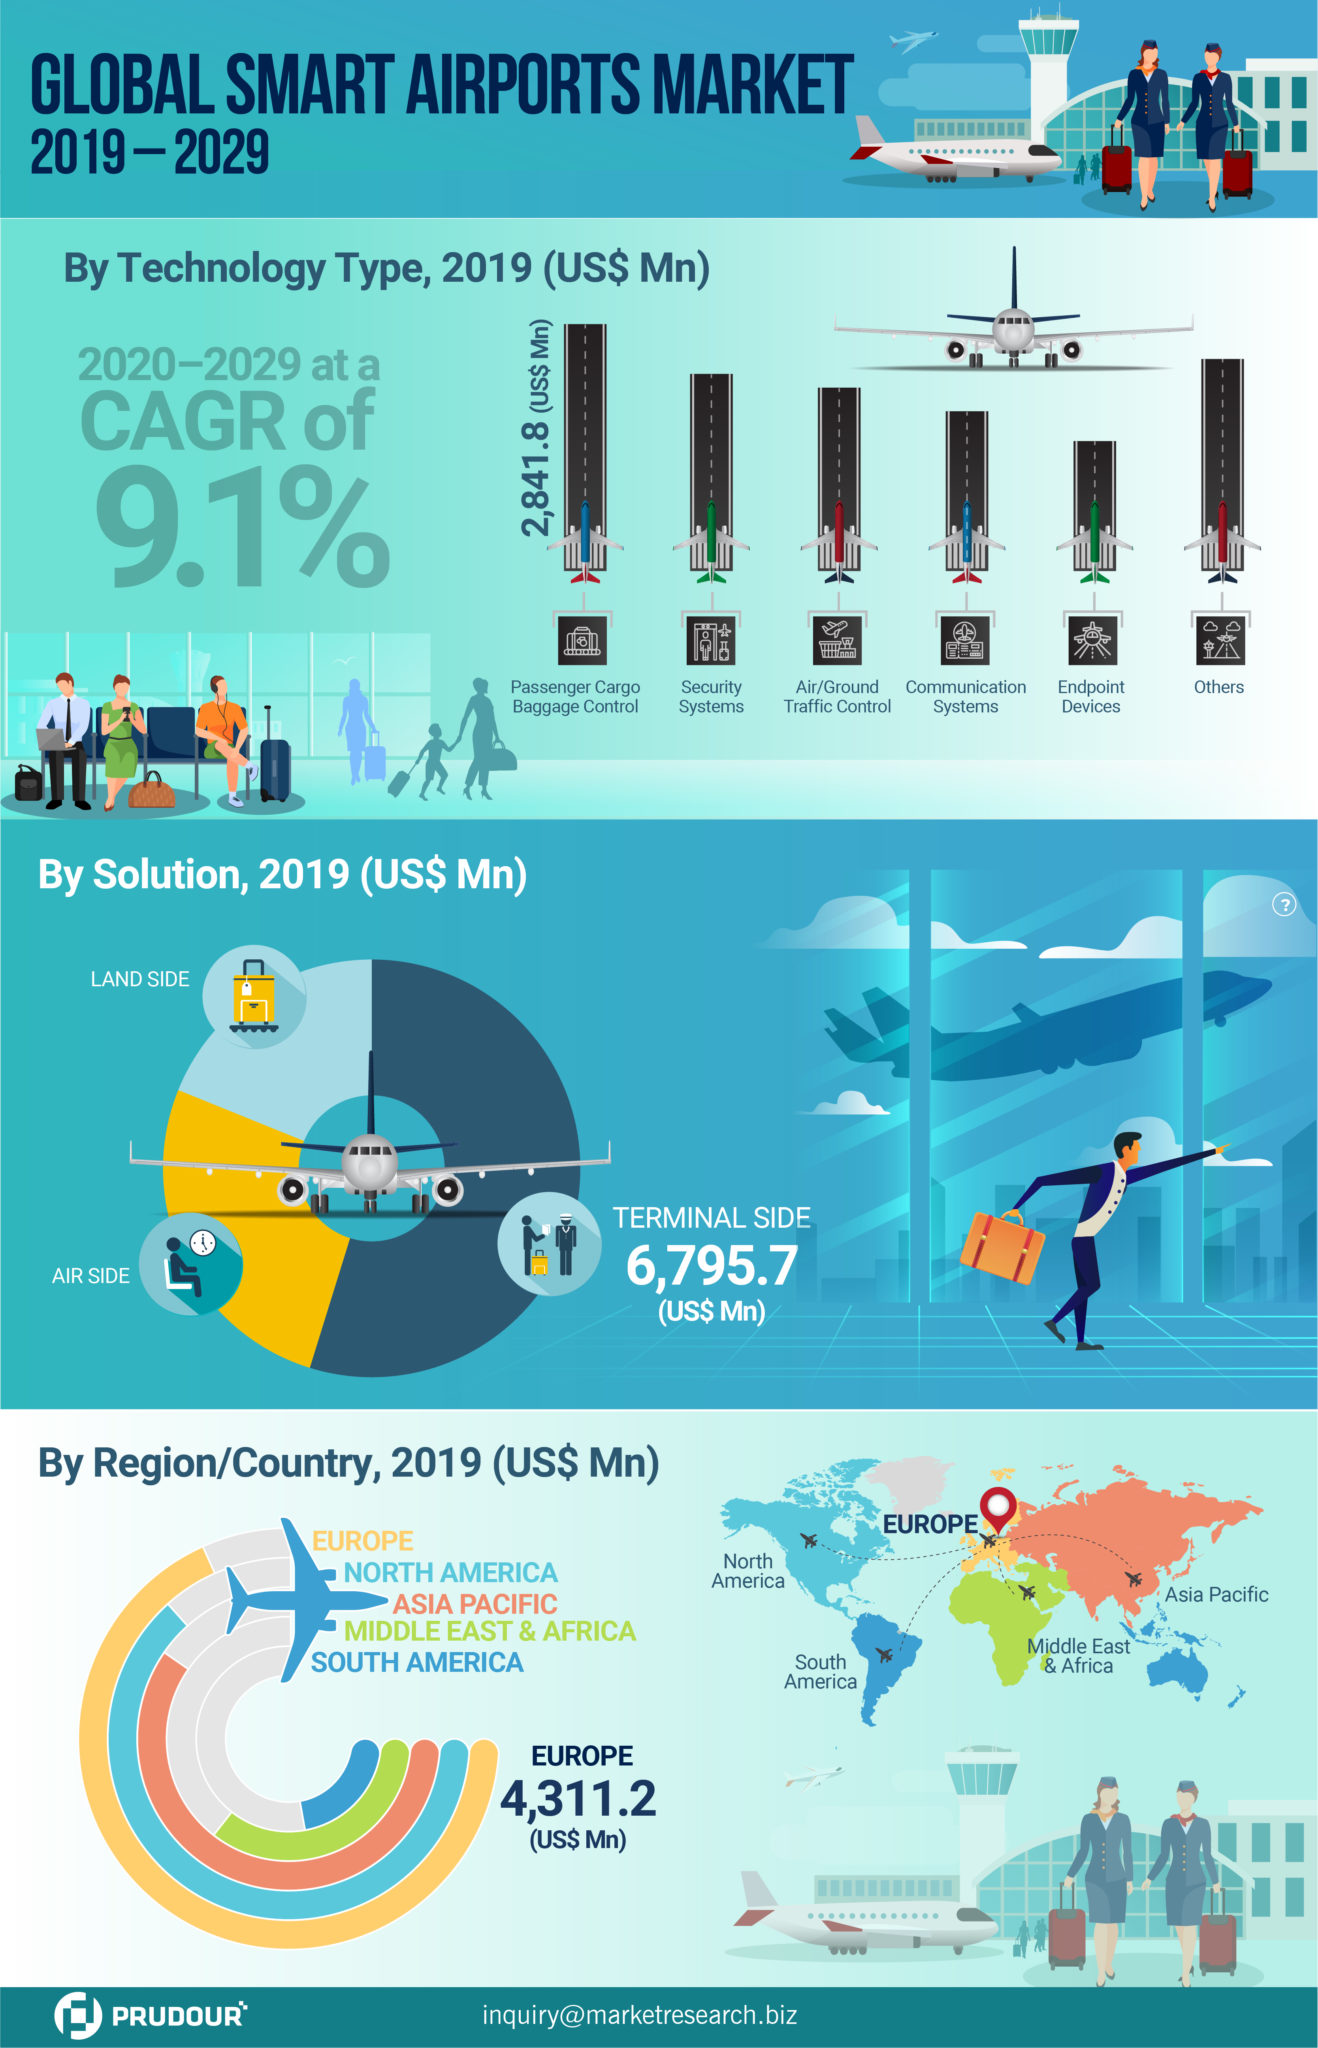 CAGR Of 9.1%: Global Smart Airports Market About To Hit CAGR of 9.1% From 2020 To 2029